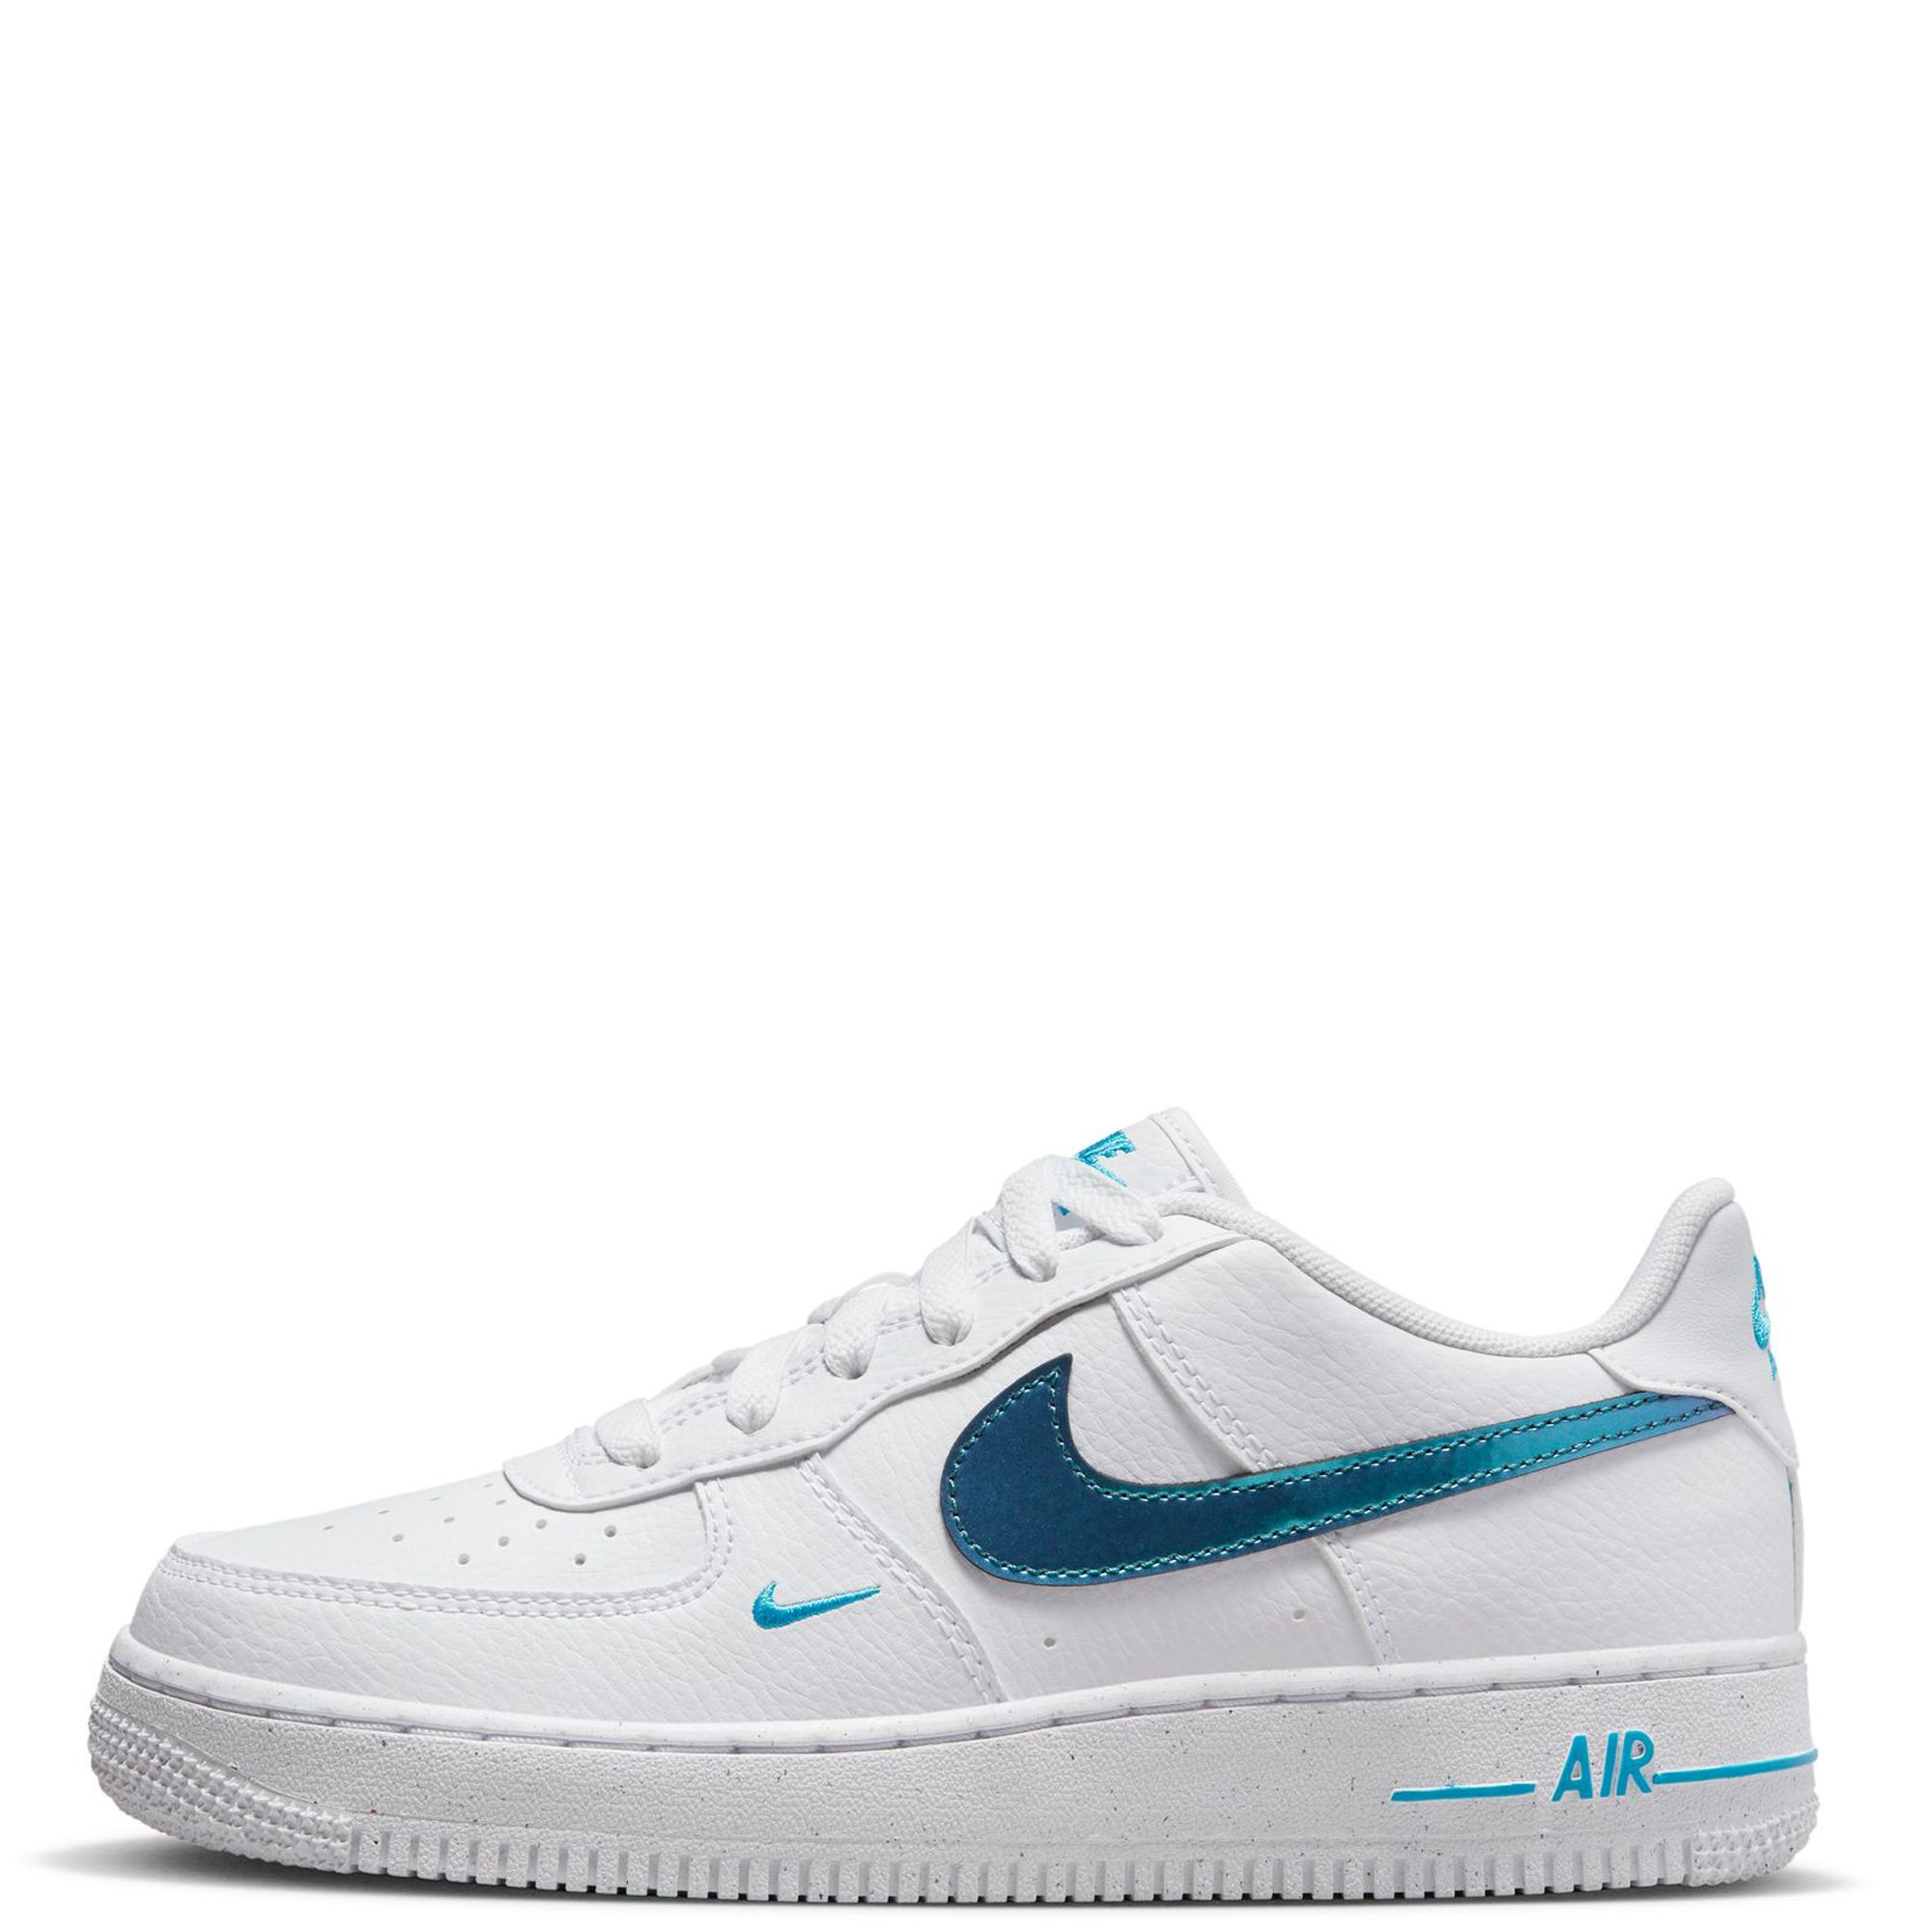 Nike Air Force One AF1 Shoes Size 6 Youth 6Y White Black Orange Womens 7.5